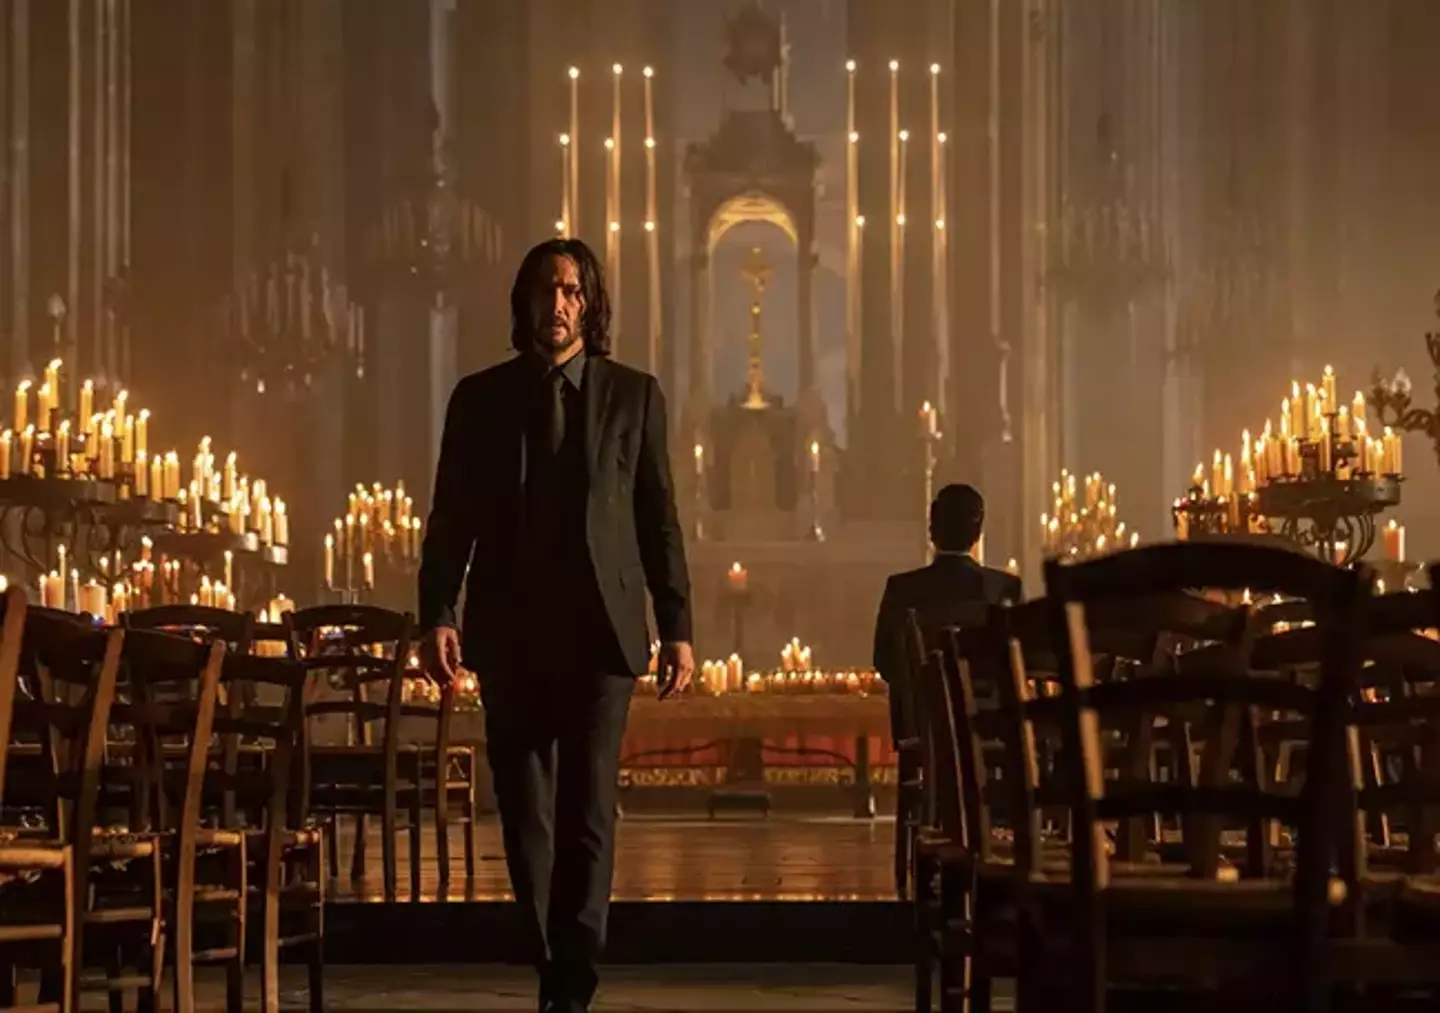 The John Wick franchise is spinning off into another movie and TV series, but the man himself could come back for another solo movie.